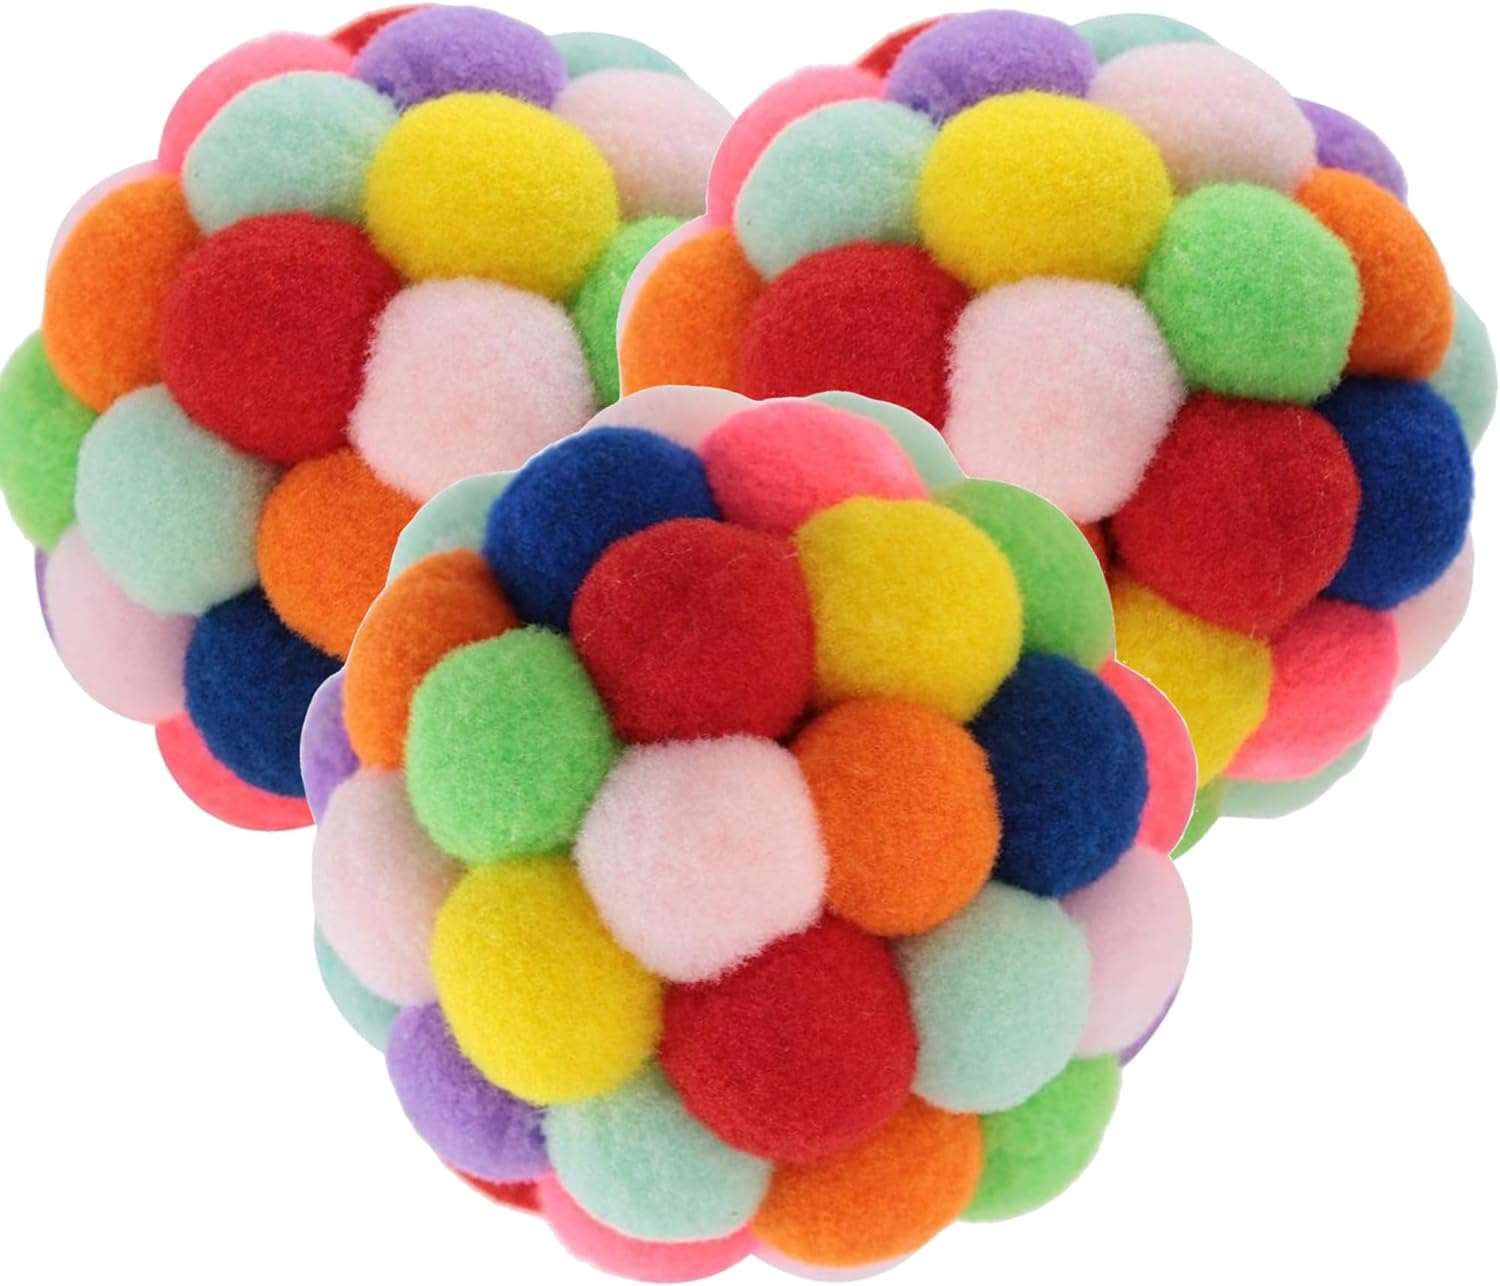 kutkutstyle Toys KUTKUT 5Pcs (4.5cm) Cat Toy Balls with Bell - Round Colorful Cat Ball Toy Built-in Bell Interactive Cat Ball Toy Soft Pompom Balls for Indoor Cats Kitten